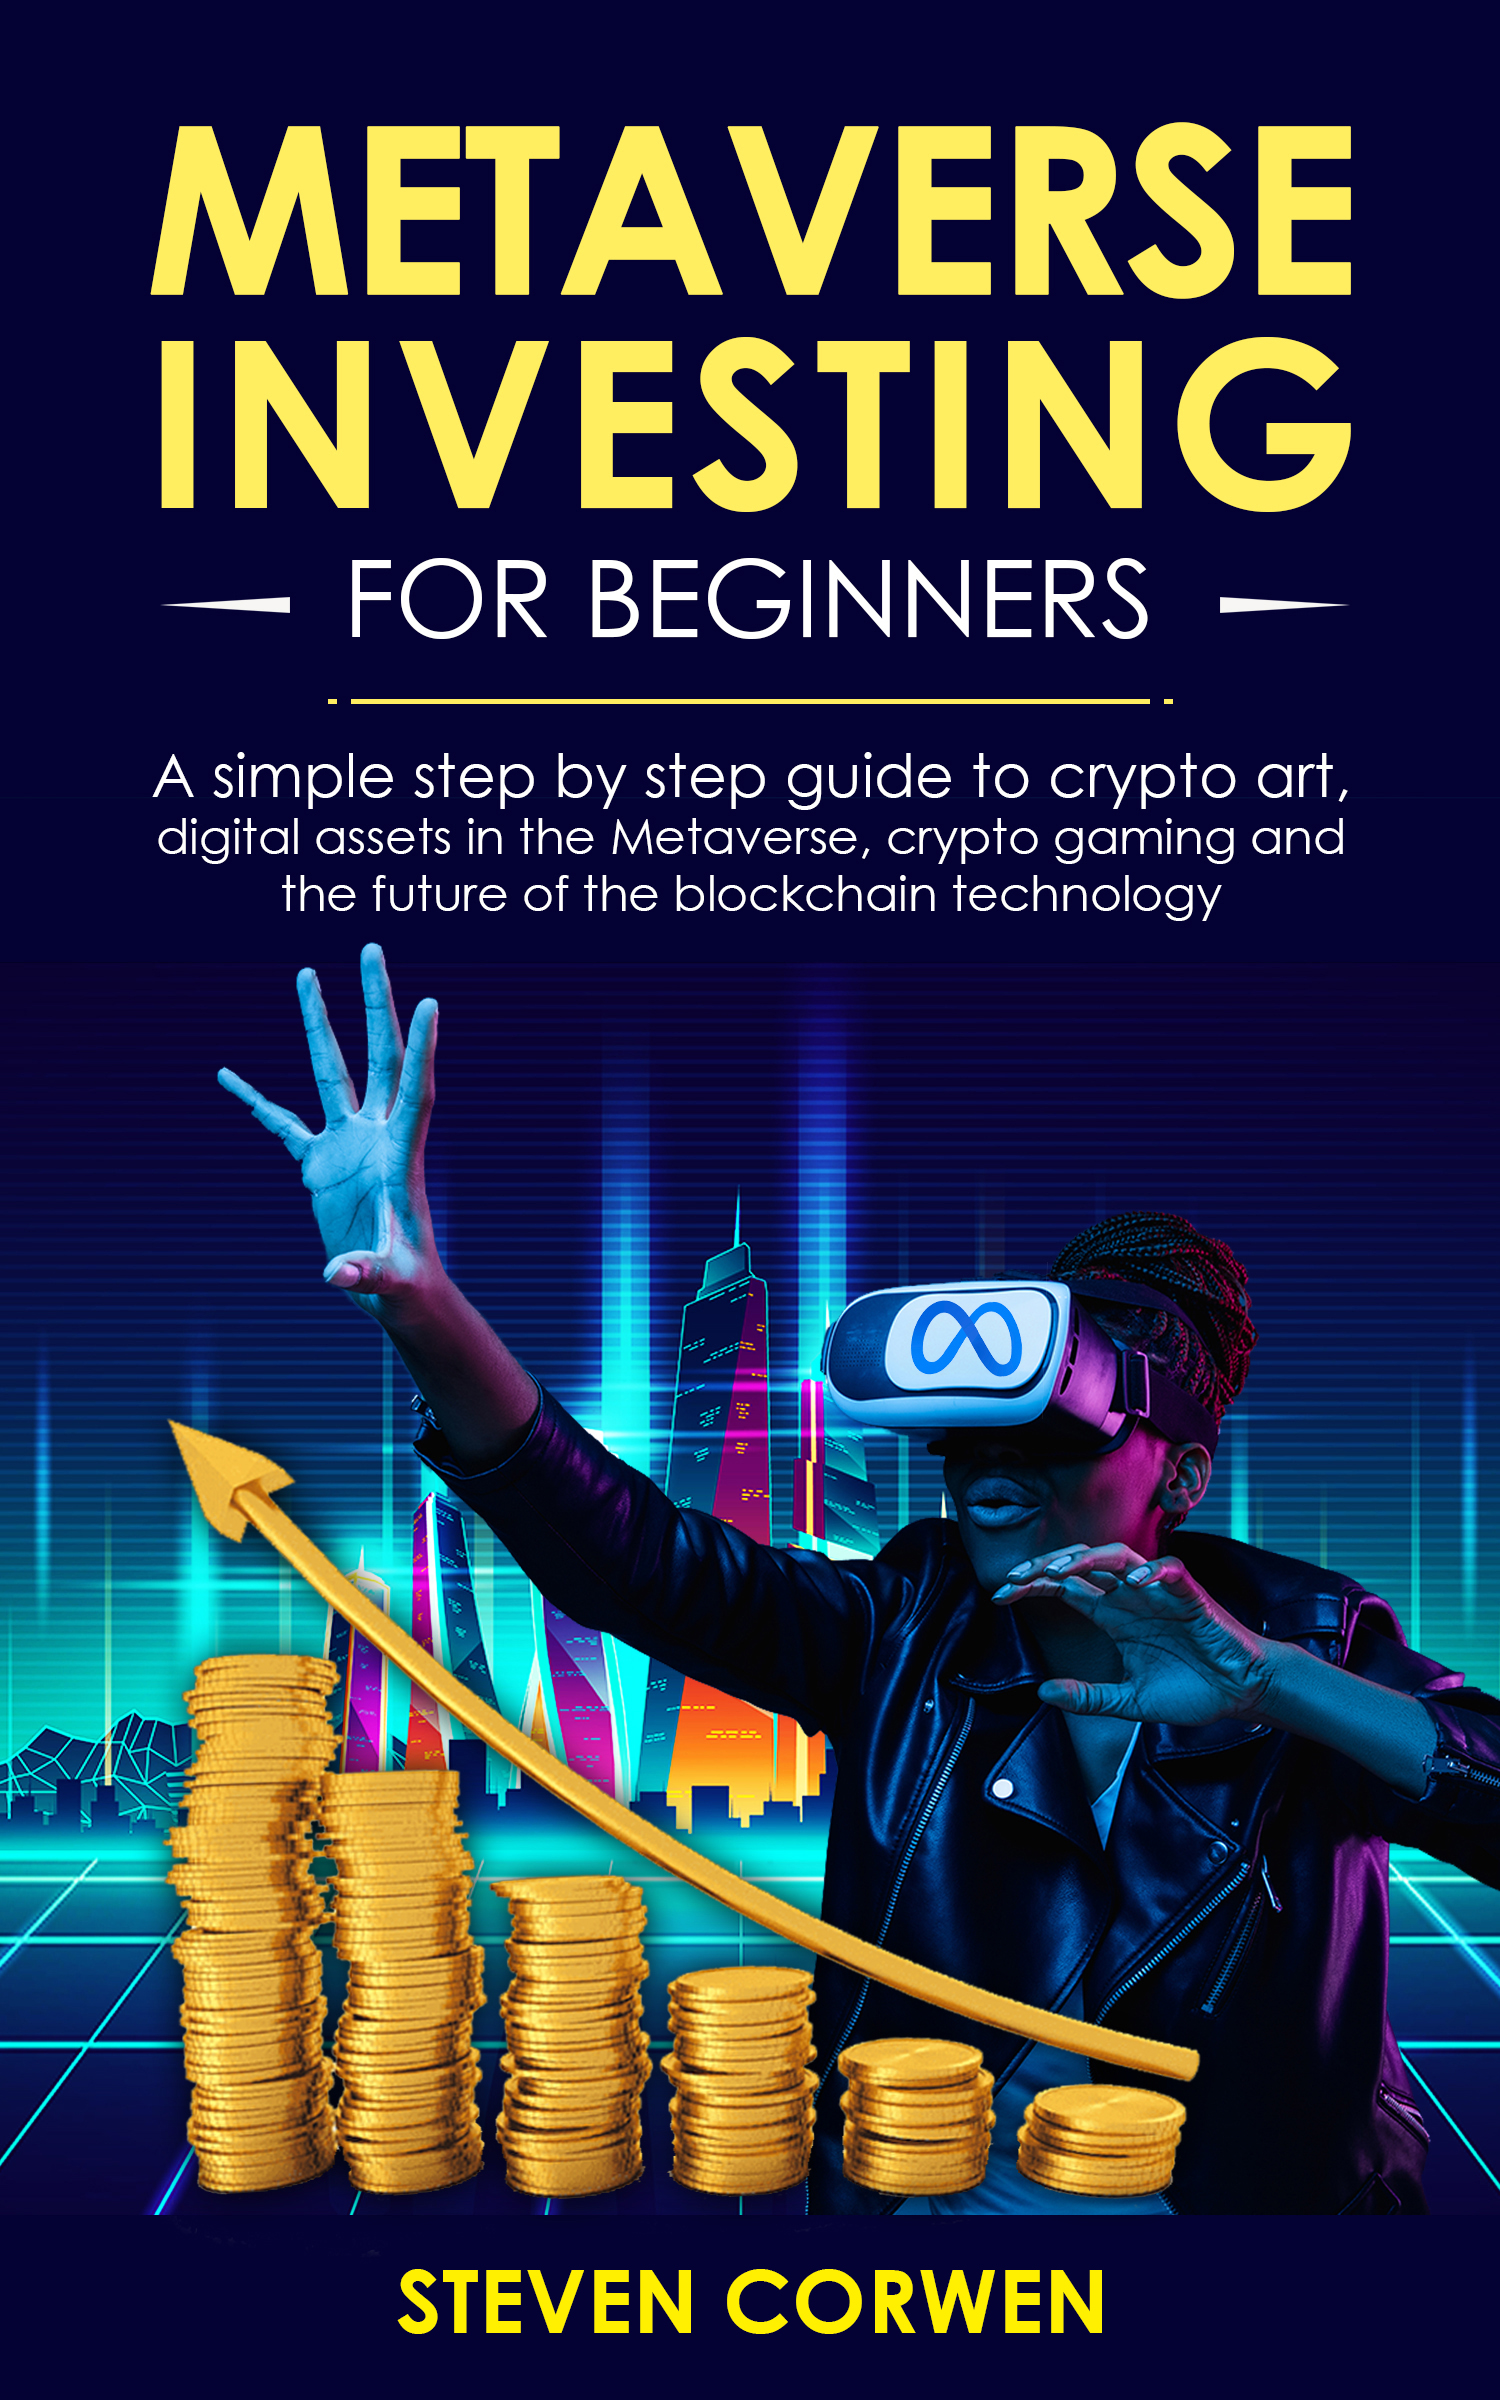 FREE: Metaverse Investing for Beginners by Steven Corwen